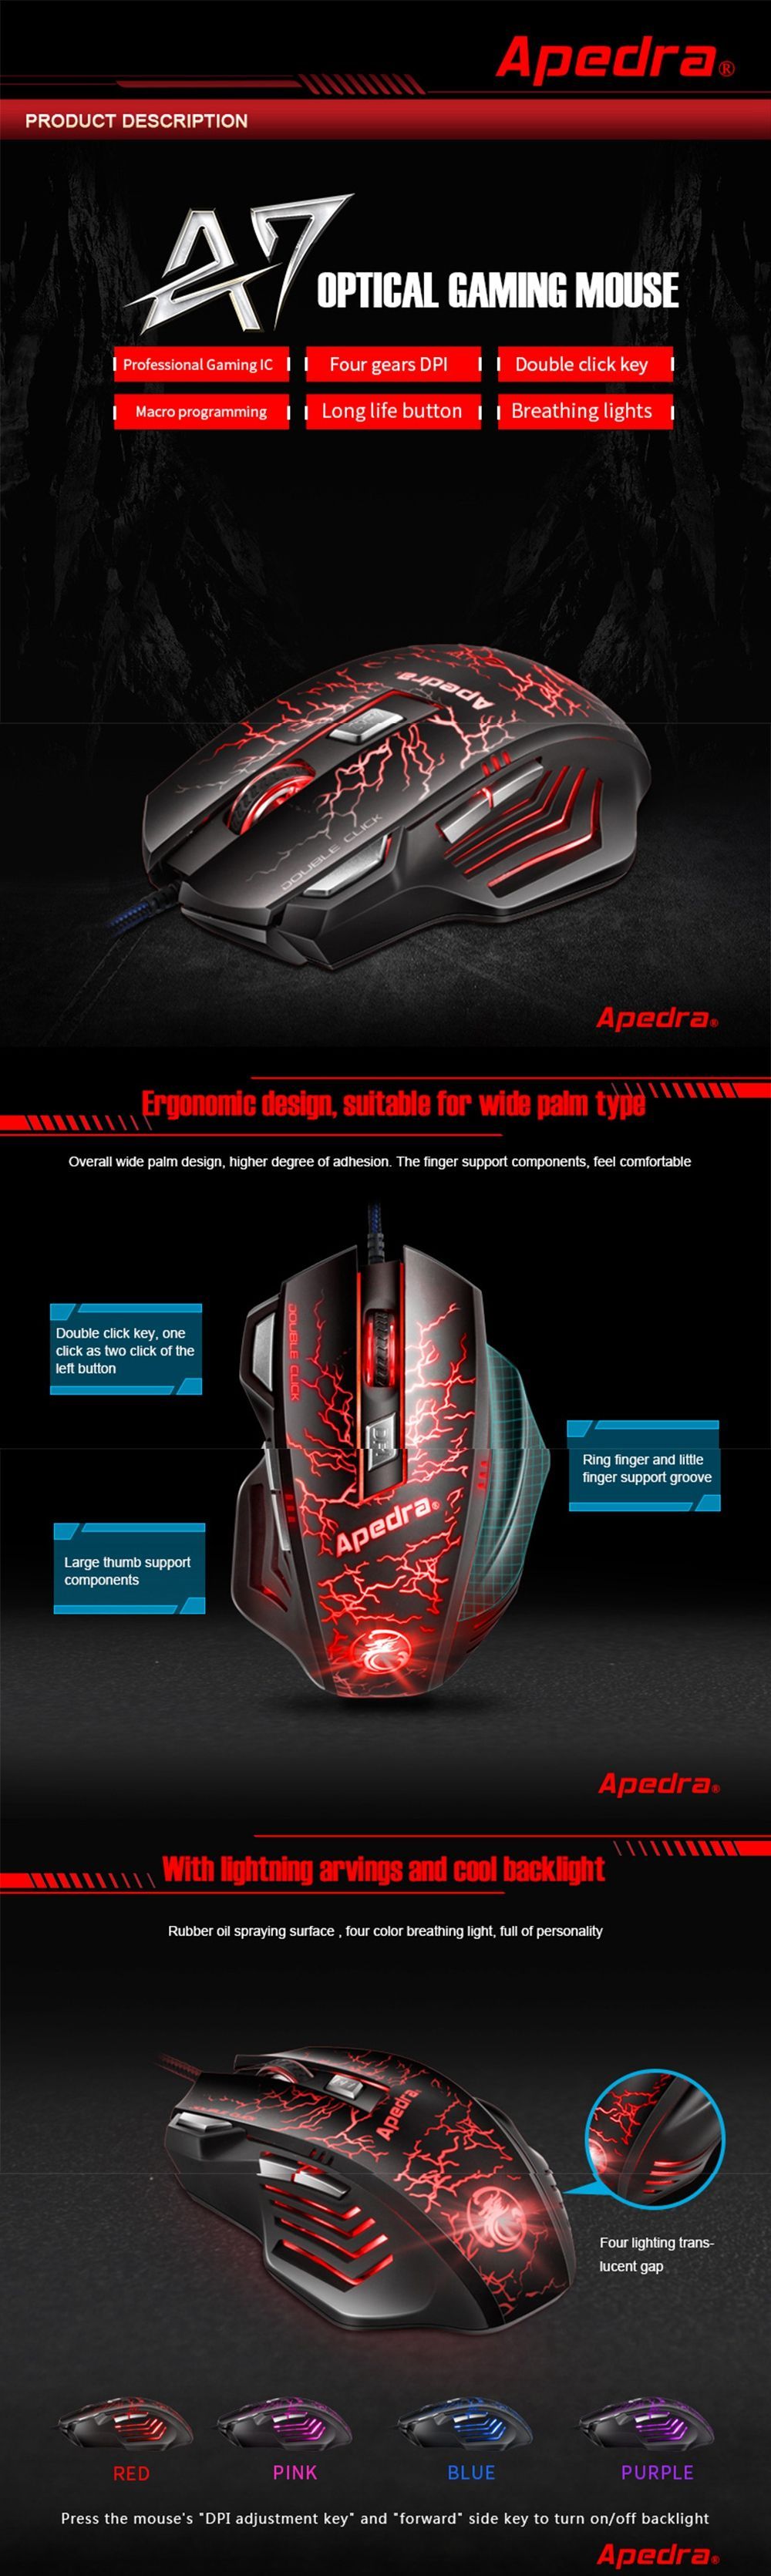 APEDRA-A7-3200DPI-7-Buttons-USB-Wired-RGB-Backlit-Gaming-Mouse-for-PC-1576592